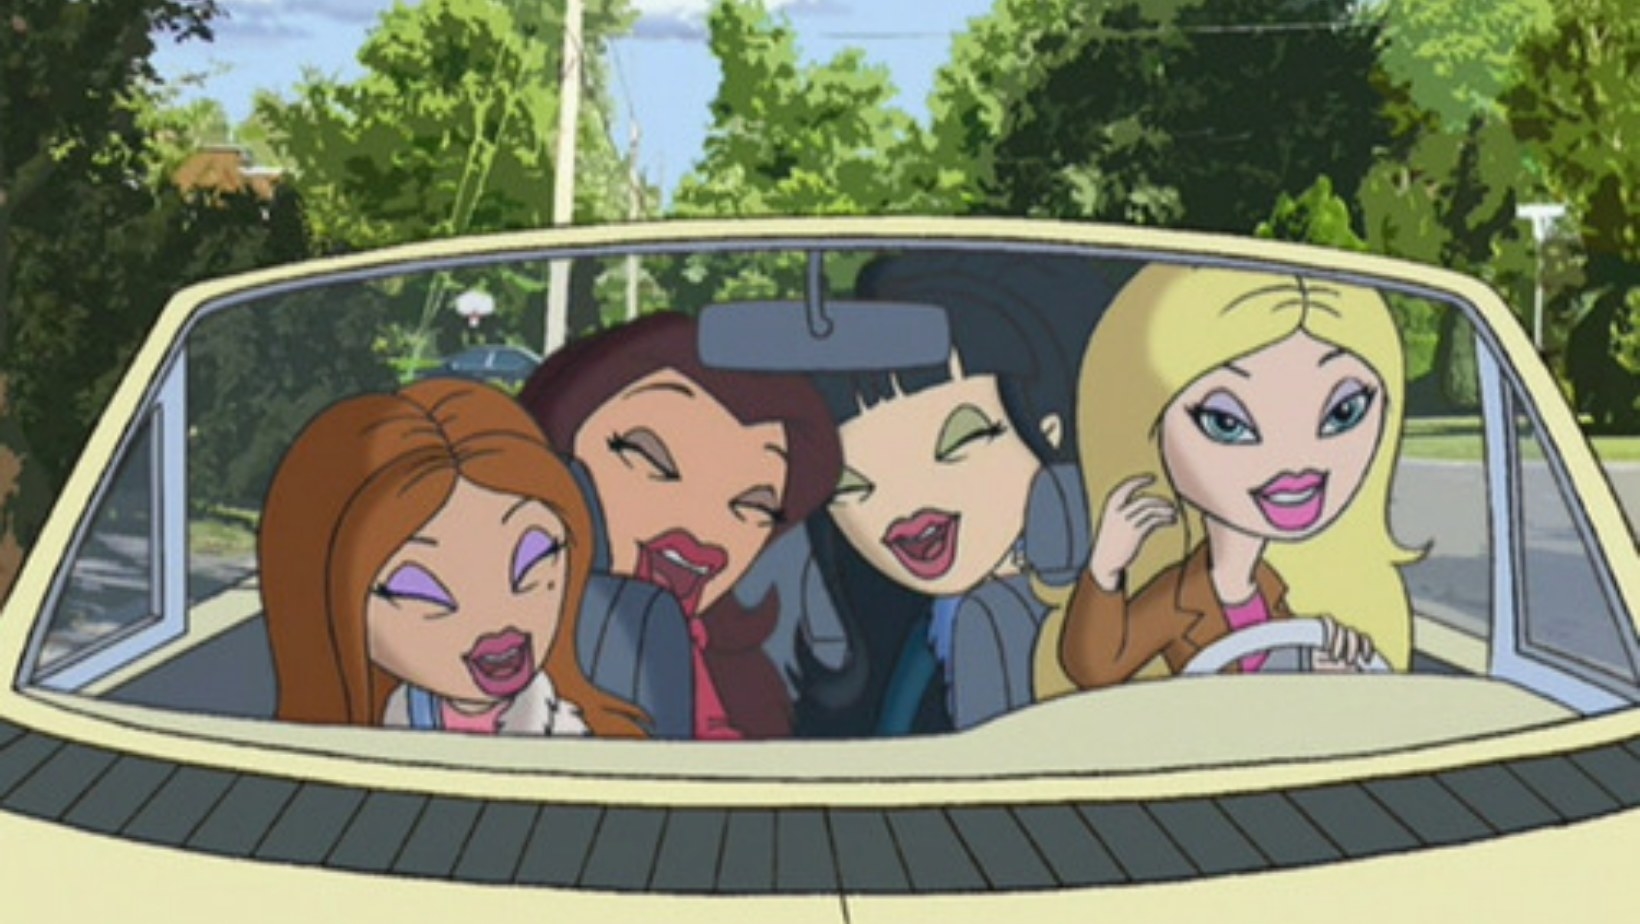 The Bratz driving down the street in their convertible with smiles on their faces